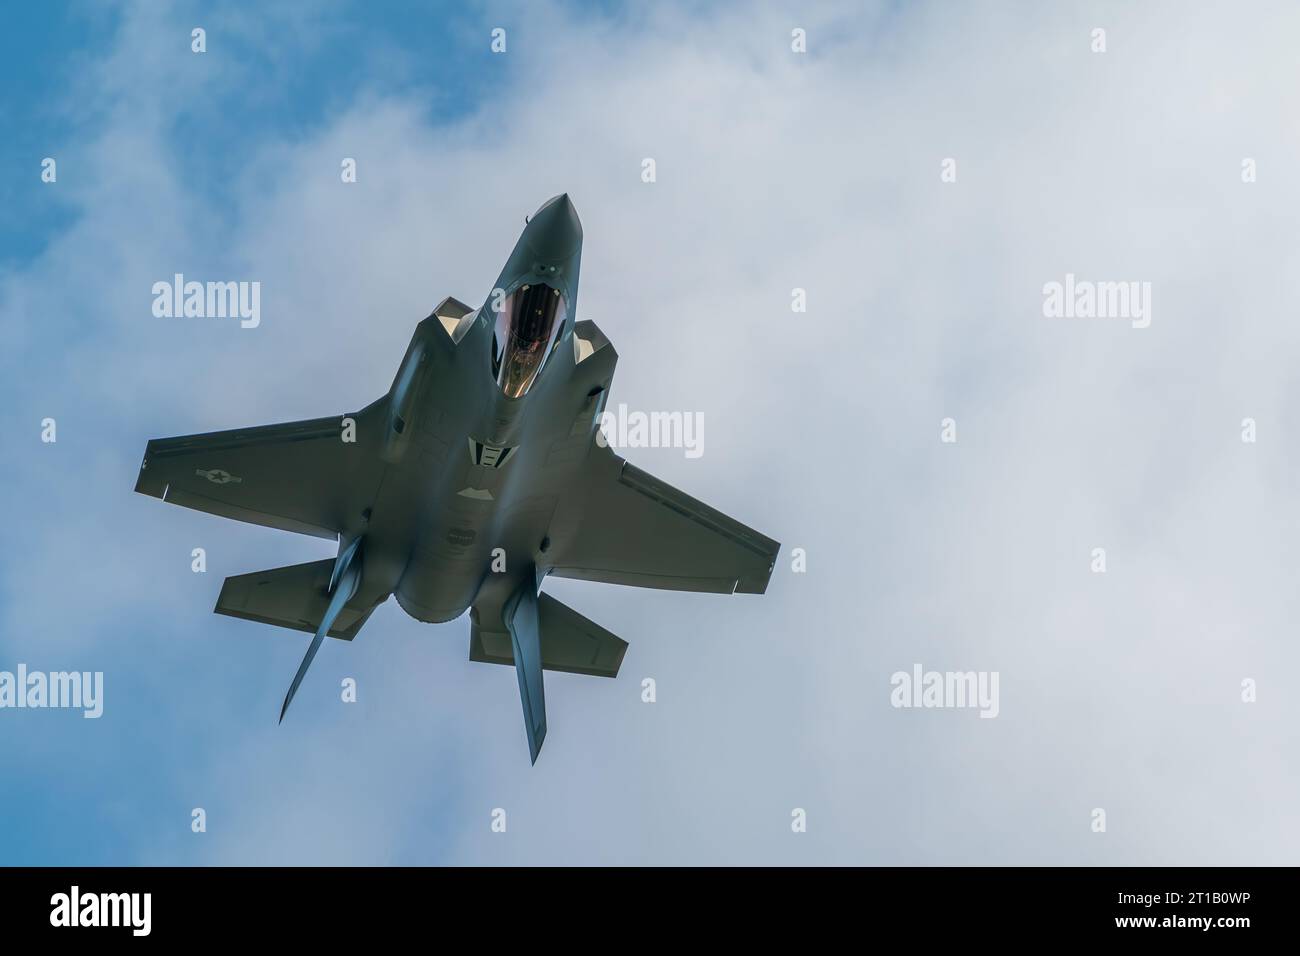 A F-35 fighter jet of the US Airforce Demo Team going upside down during a local airshow Stock Photo